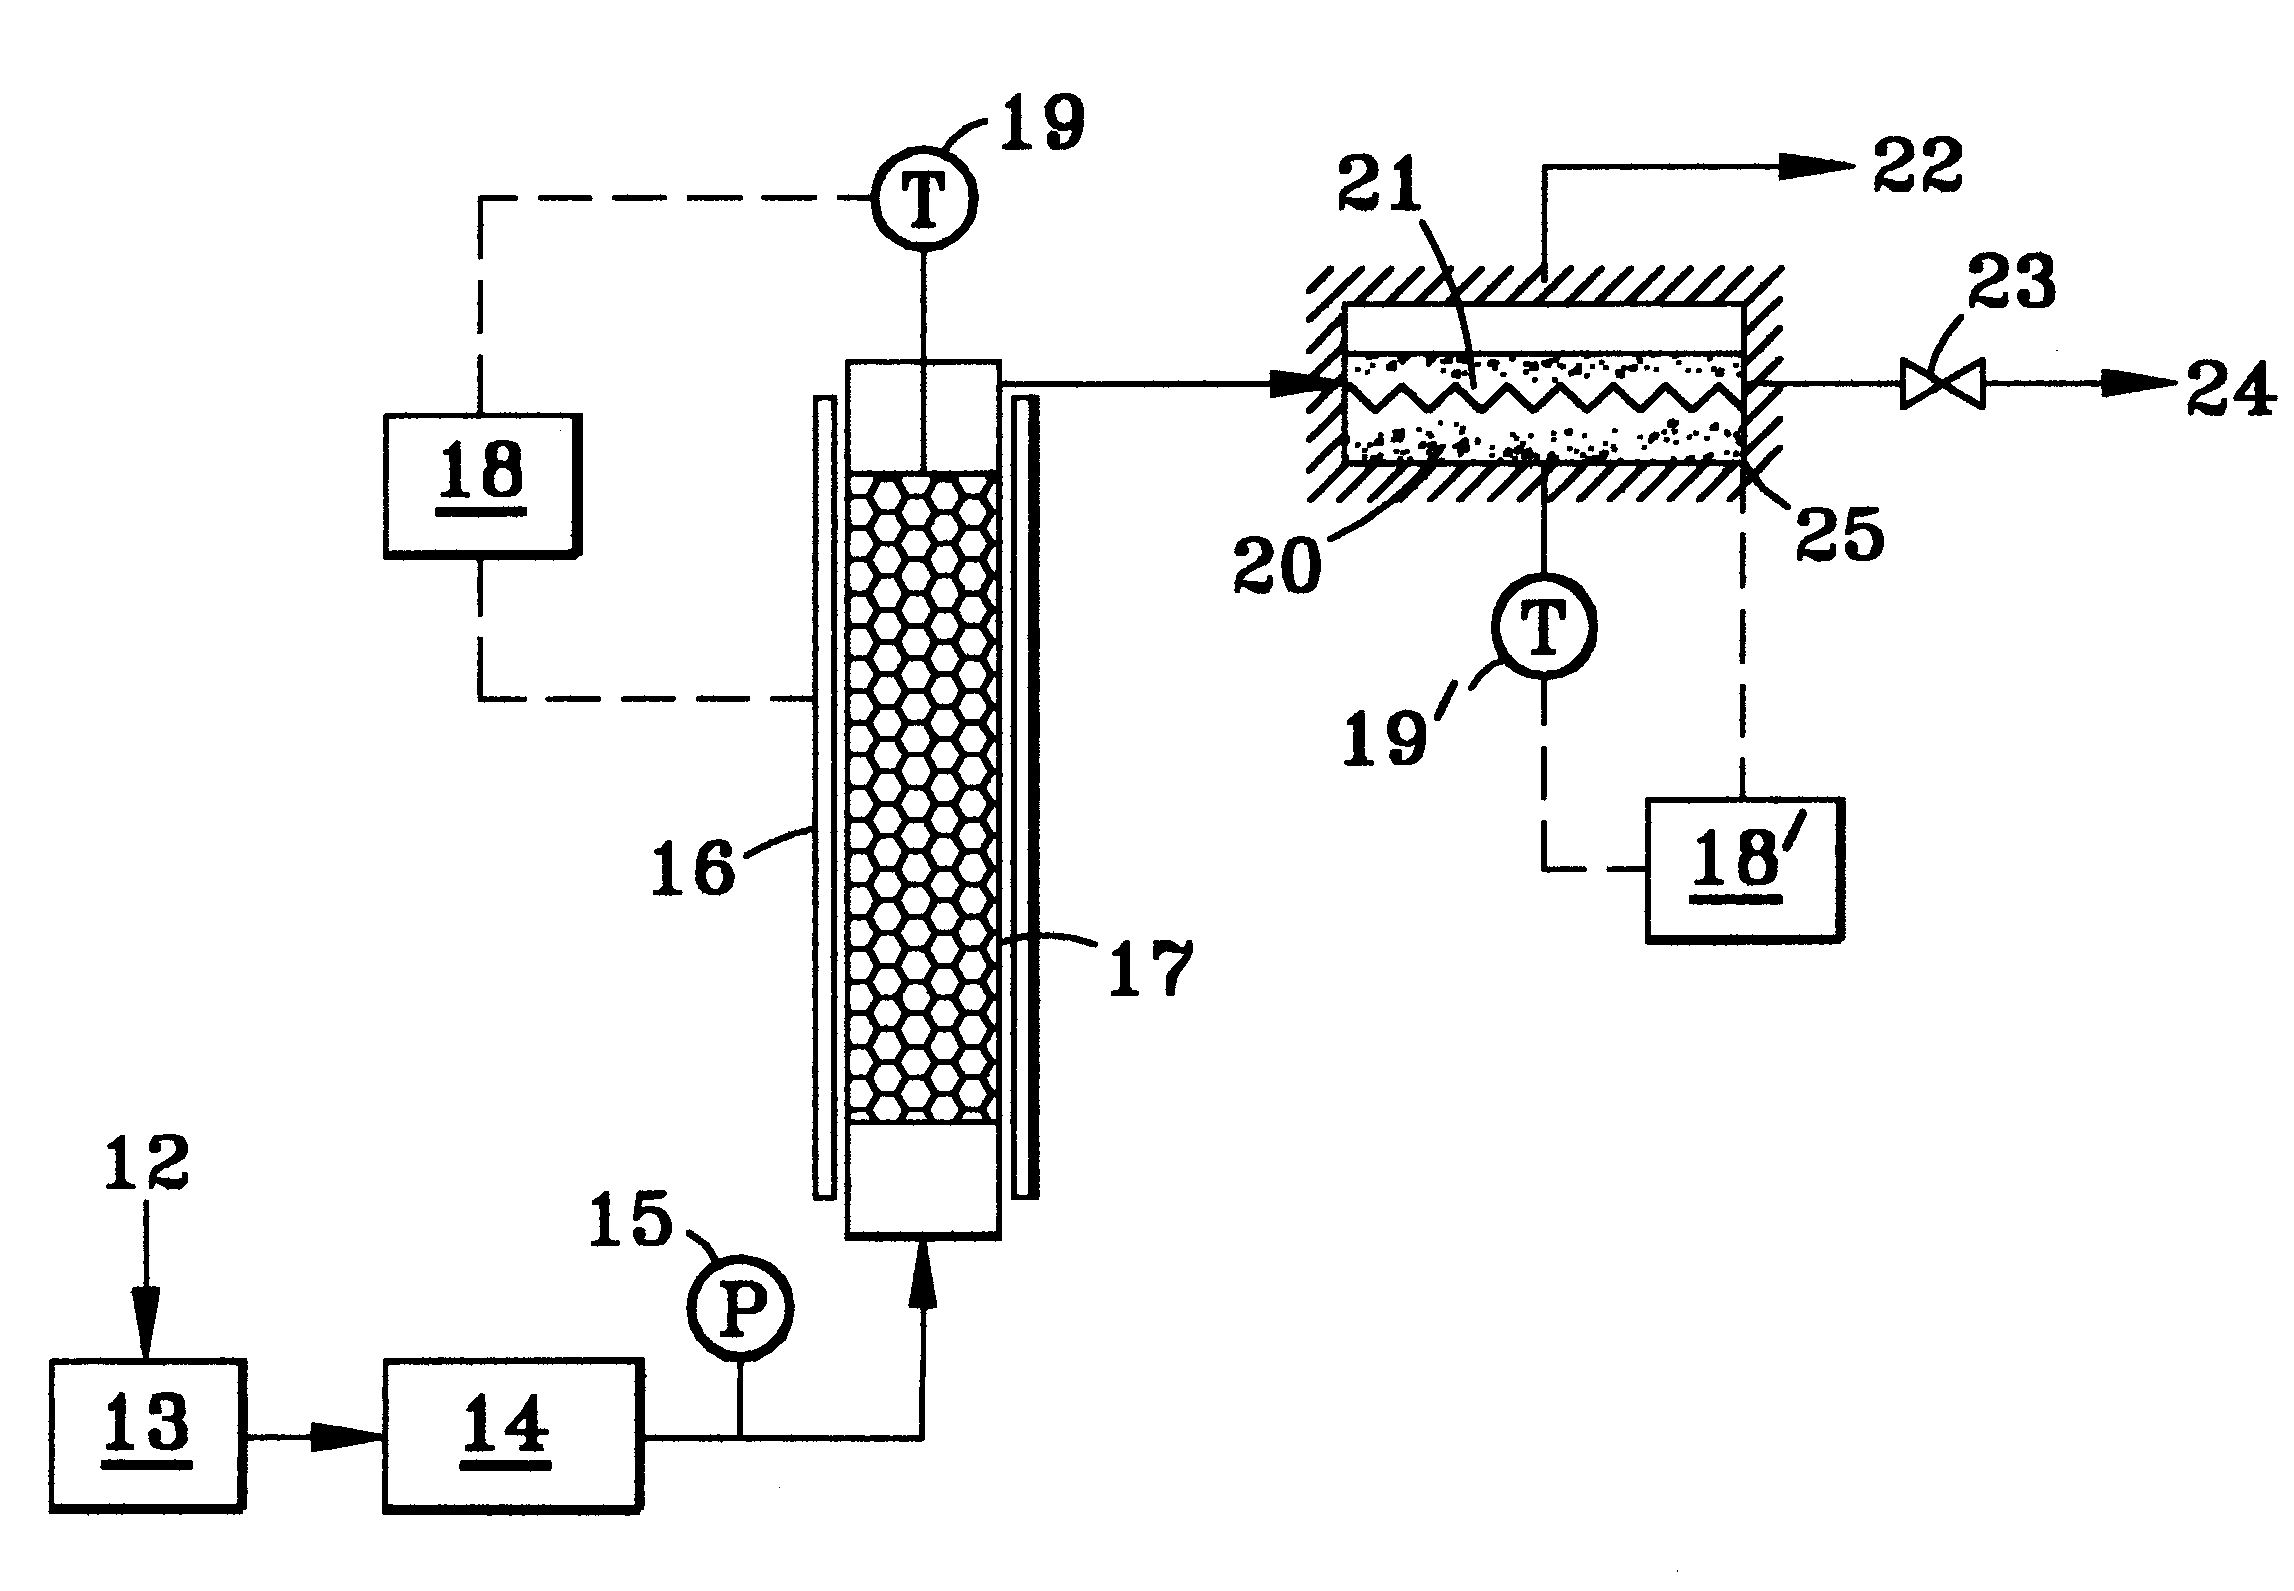 Method of linking membrane purification of hydrogen to its generation by steam reforming of a methanol-like fuel